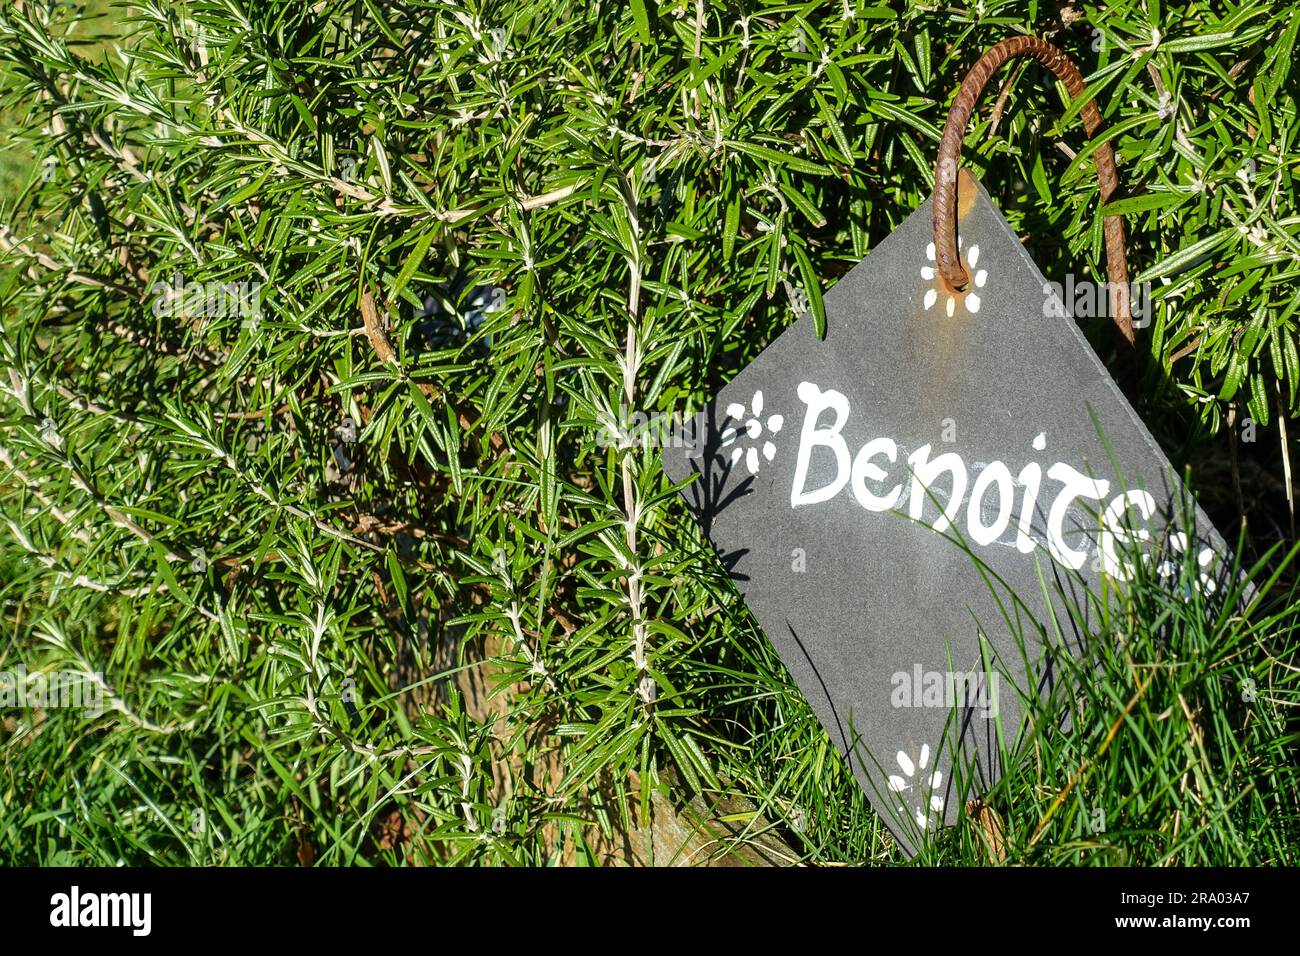 Benoite (geum) name marked on a slate in a garden in France Stock Photo